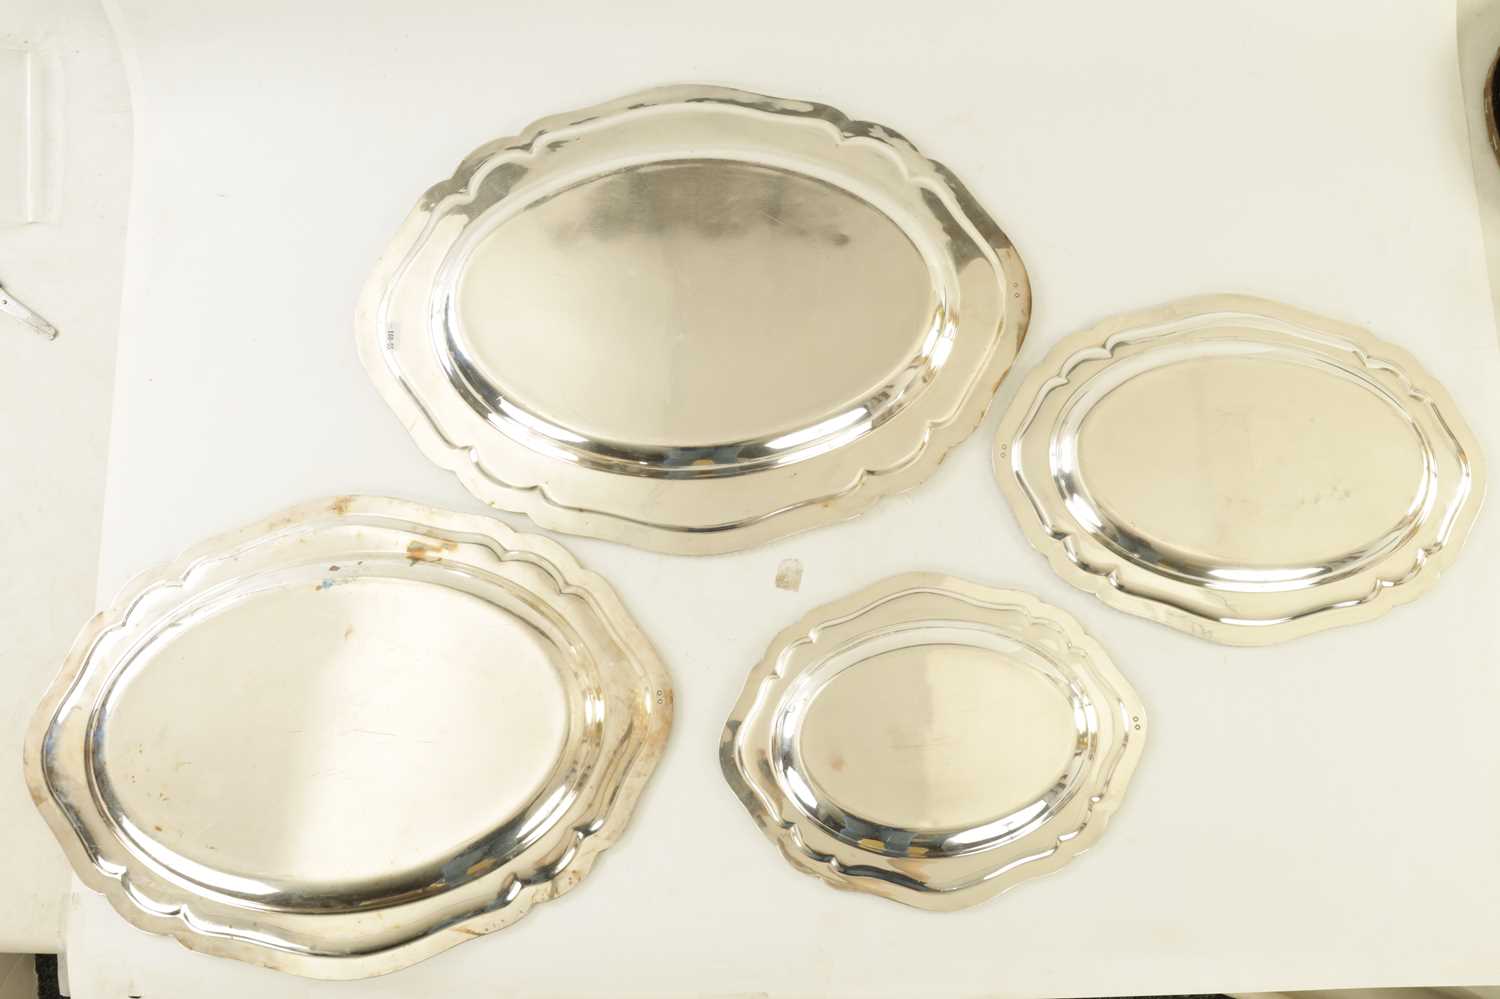 A SET OF FOUR REGENCY SILVER PLATE SCALLOP-EDGE OVAL SERVING DISHES BY MATTHEW BOULTON - Image 4 of 5